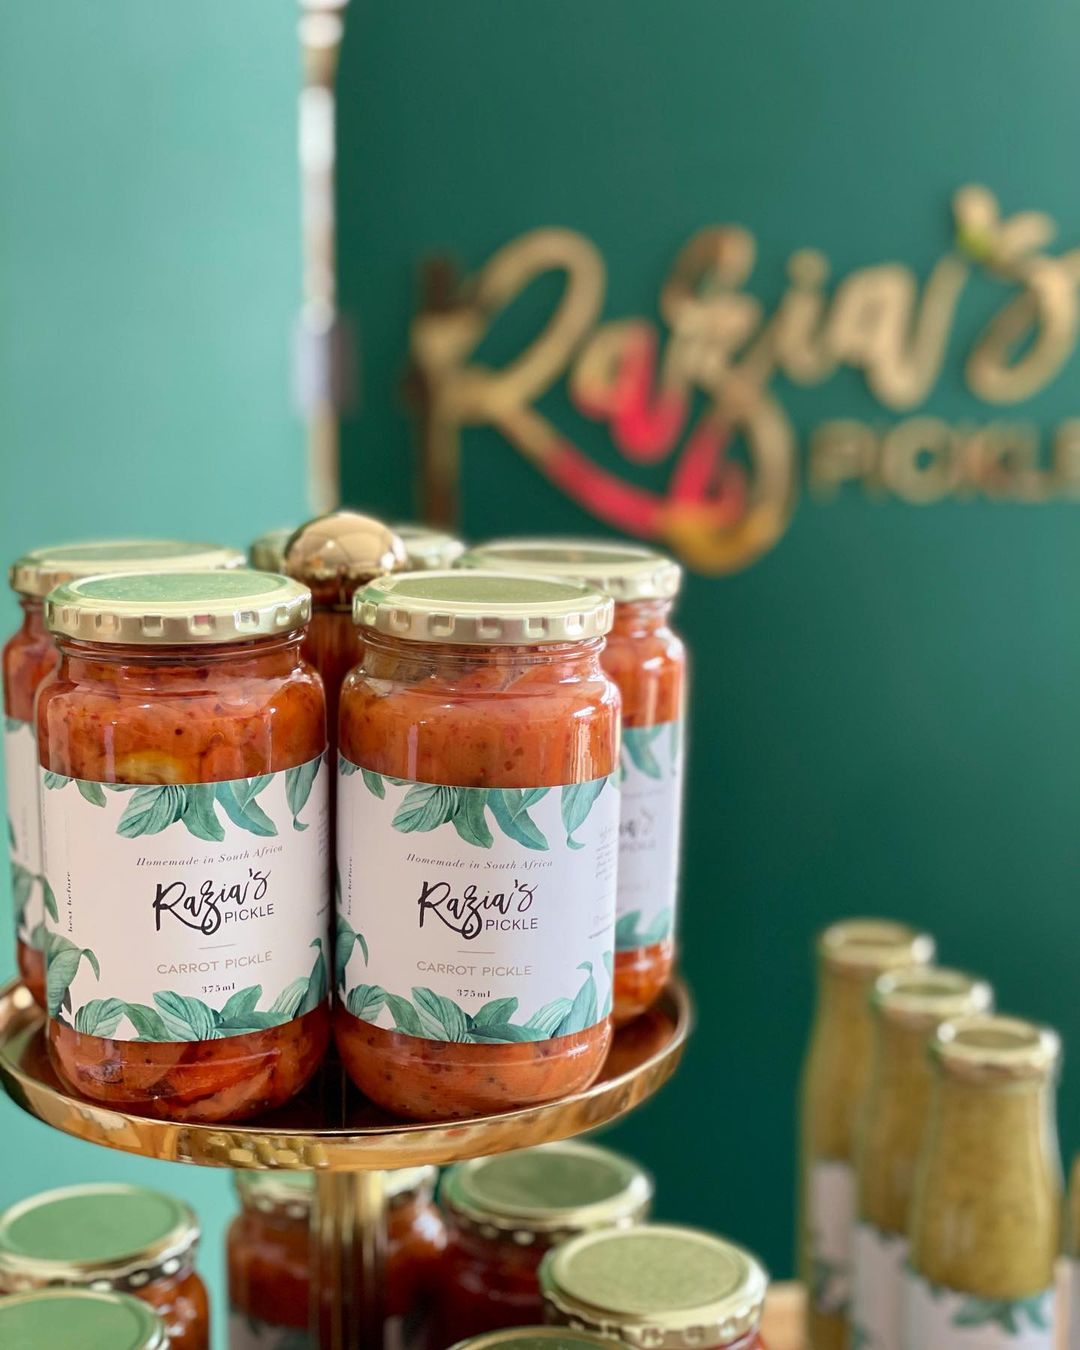 Mother-daughter team celebrates heritage and culture with the launch of Razia’s Pickle